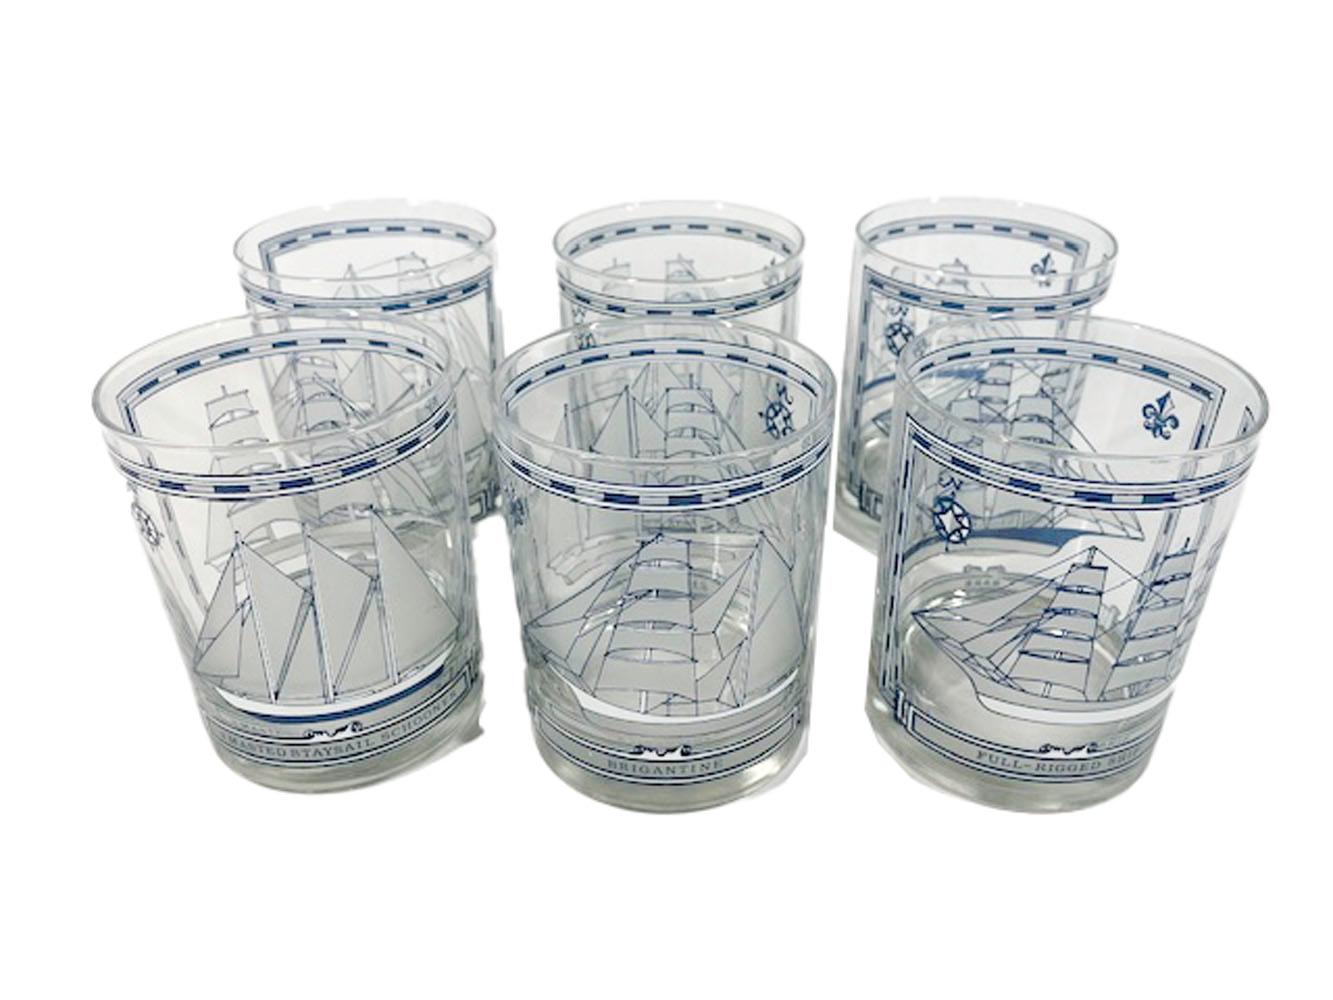 American Six Georges Briard Nautical Themed Rocks Glasses with Different Sailing Ships